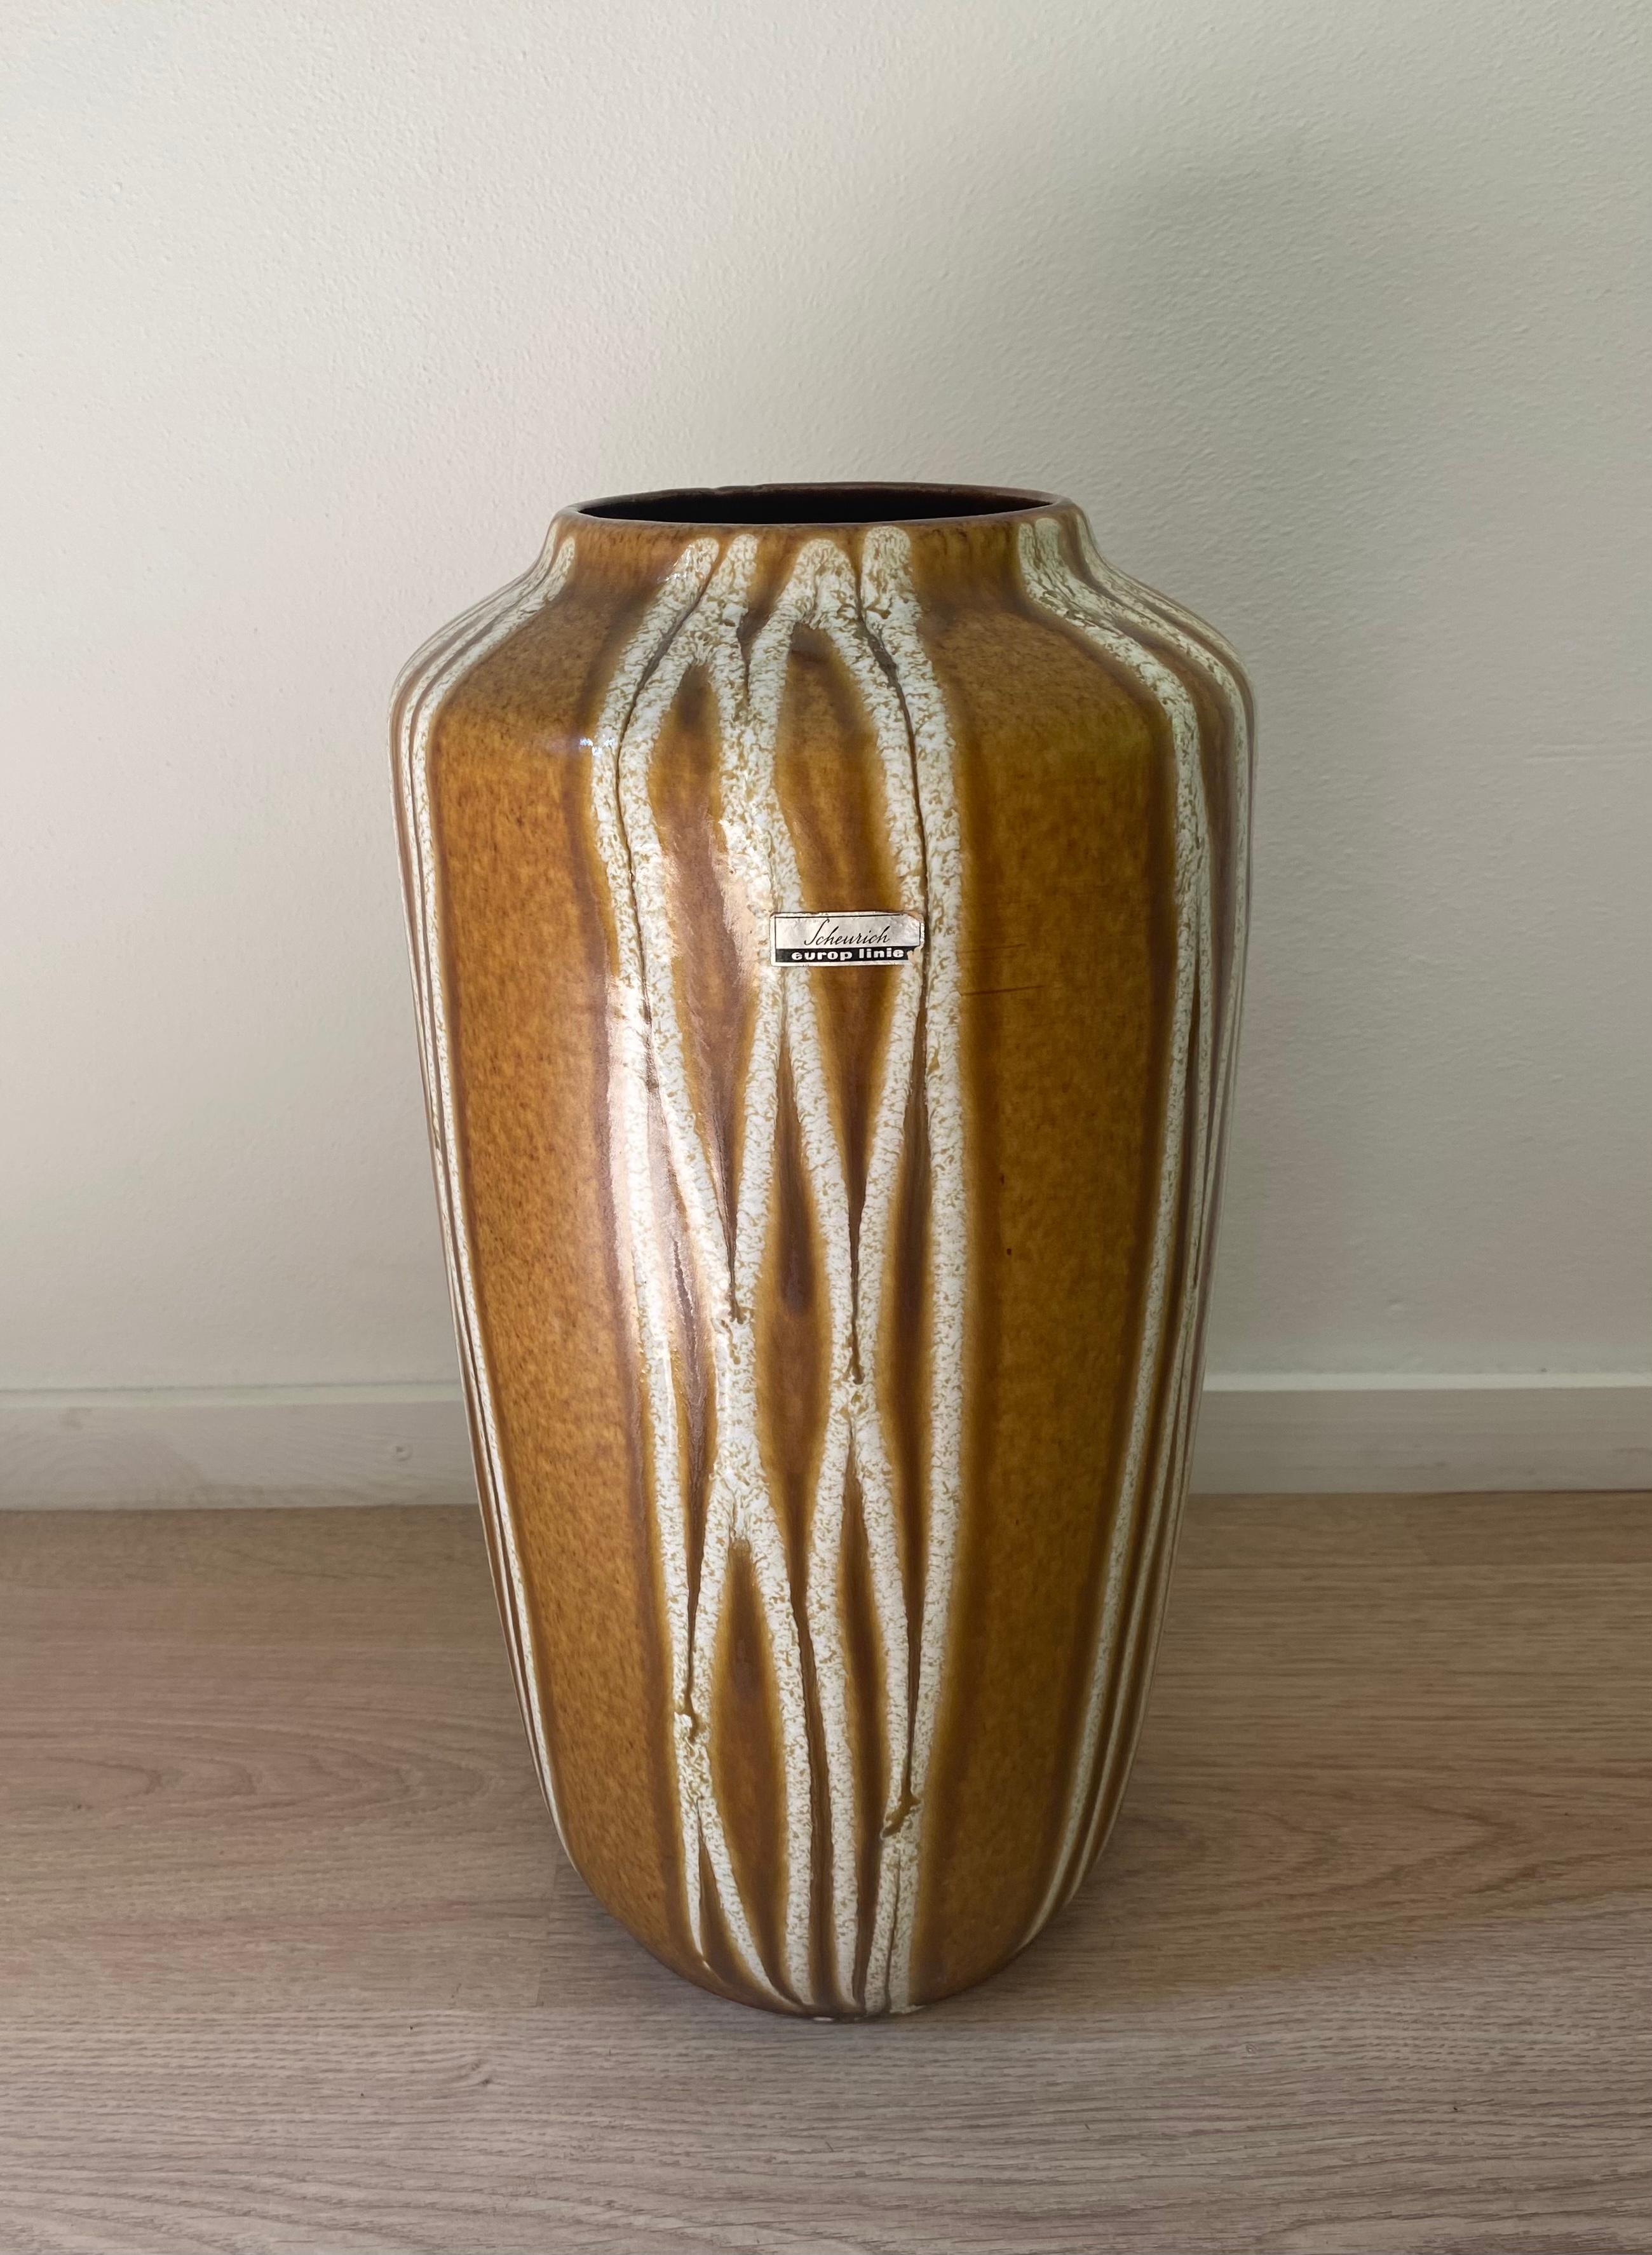 Beautiful ceramic piece, Handpainted in light Brown and White decoration from the Europ Linie. The piece is in absolute wonderful condition with only possible minor signs of age and use.